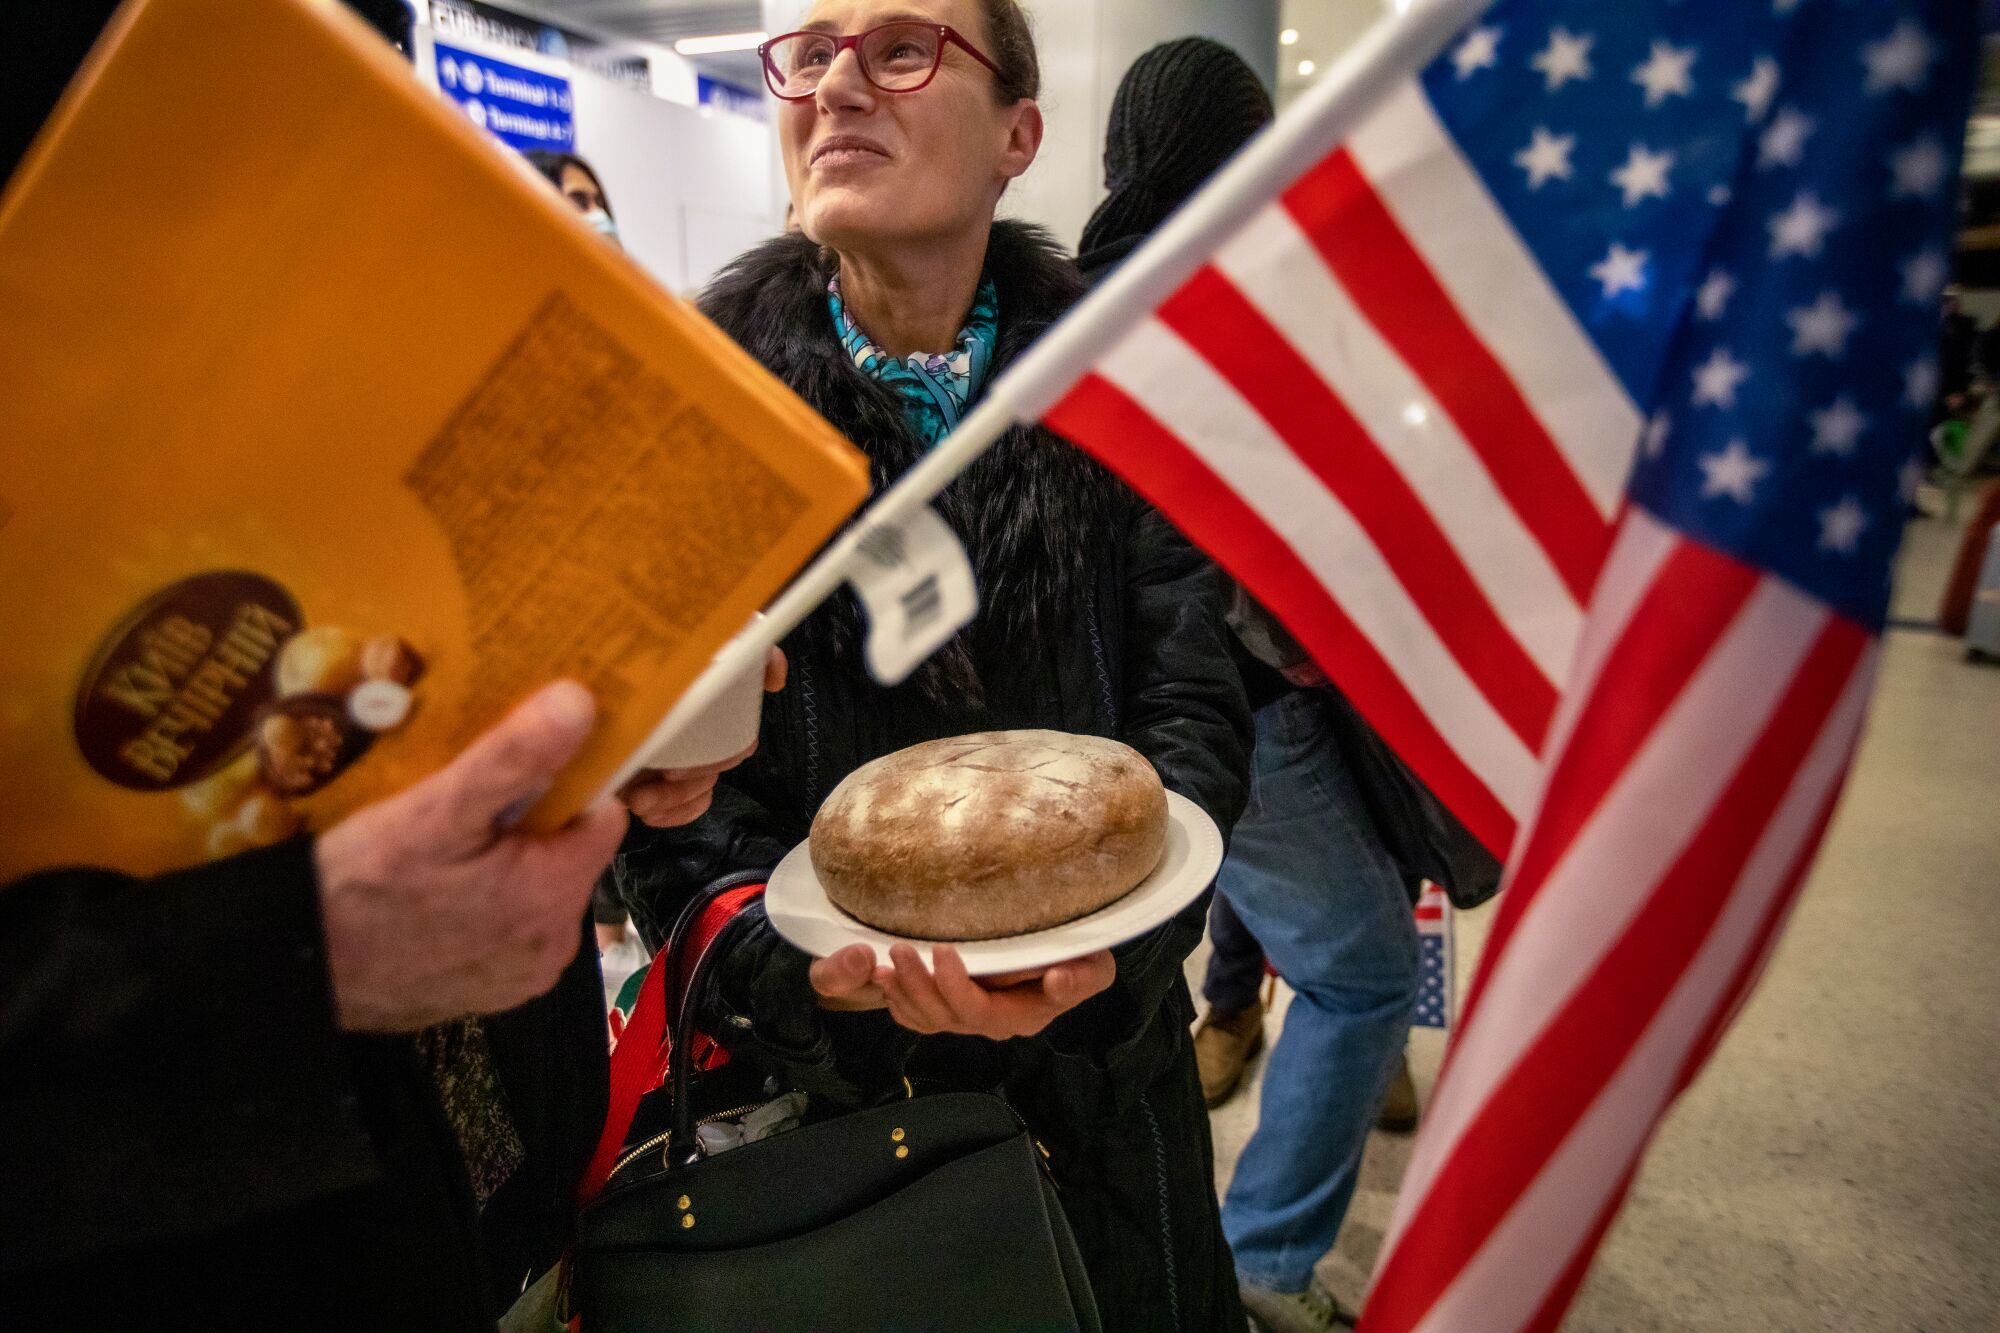 A woman stands, framed behind an American flag, holding a plate with bread on it.